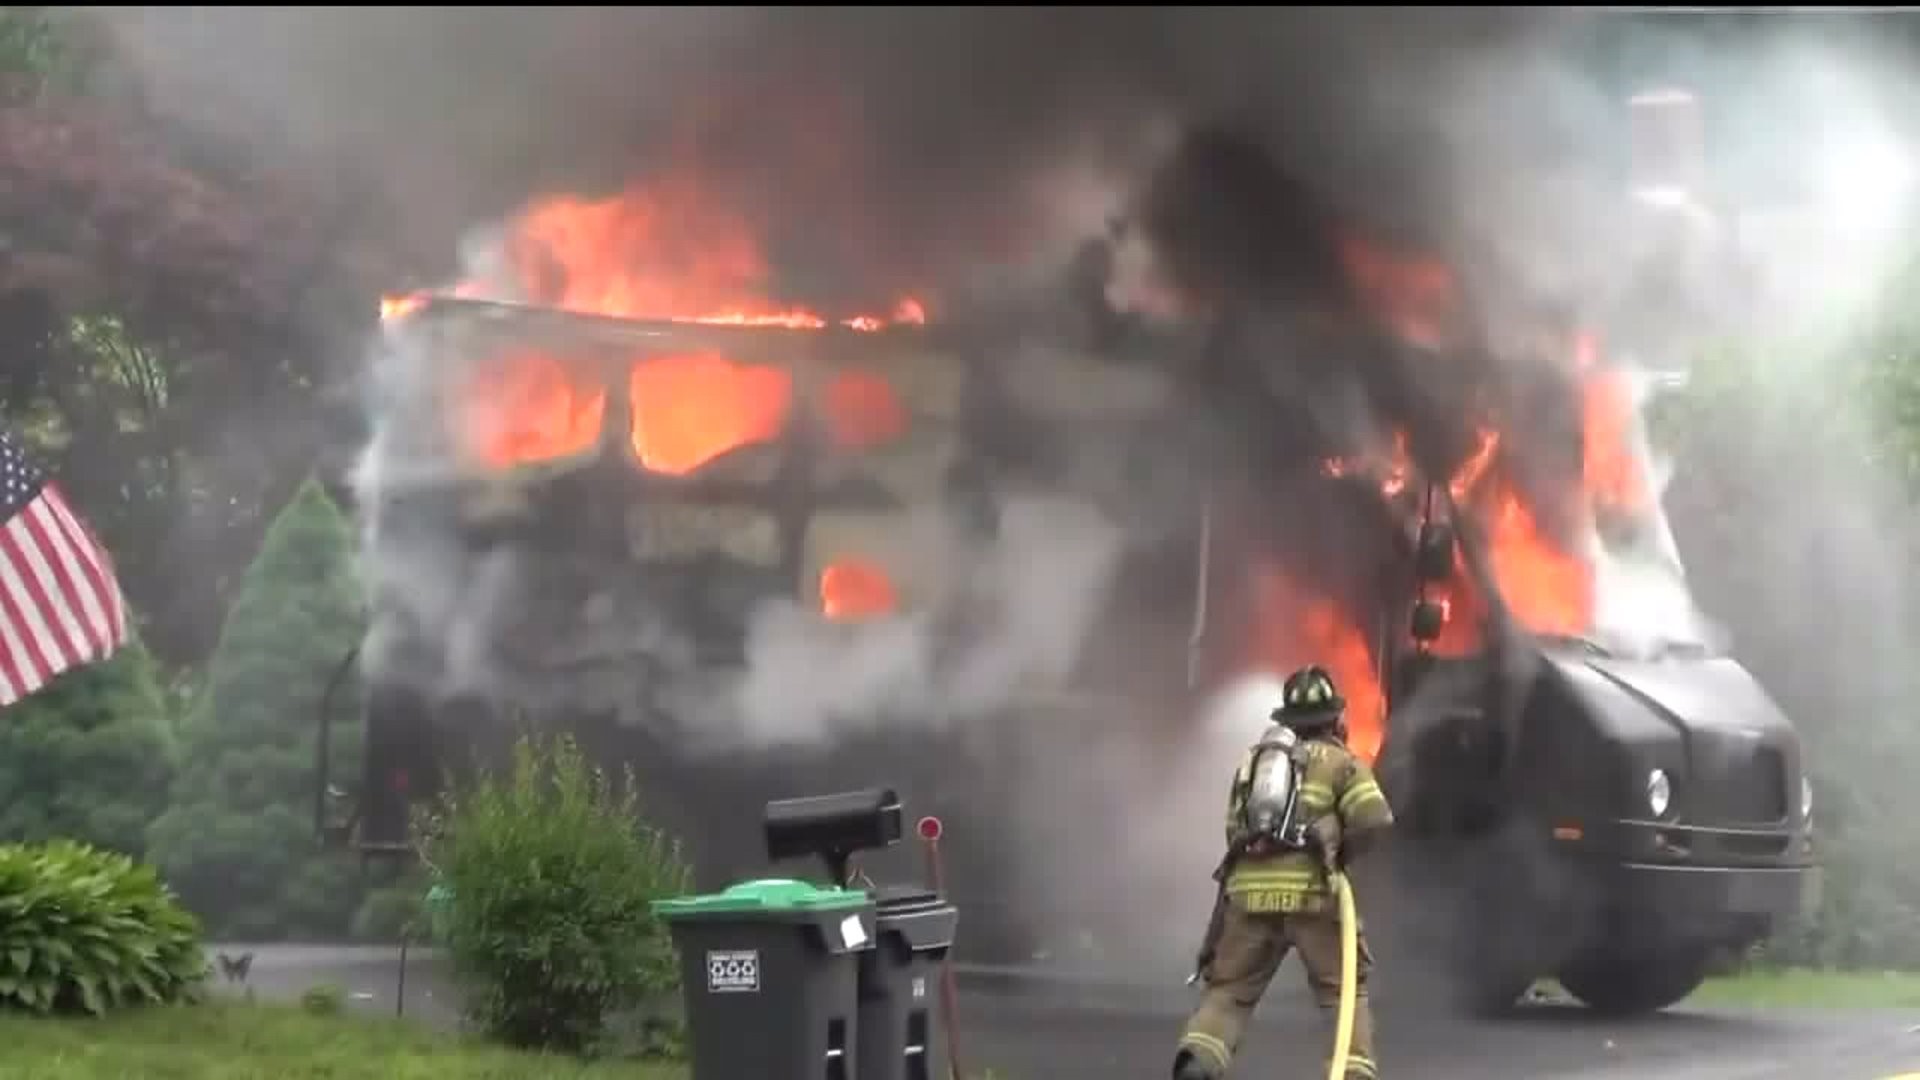 Homeowners React to Hearing About UPS Truck Catching Fire in Their Driveway